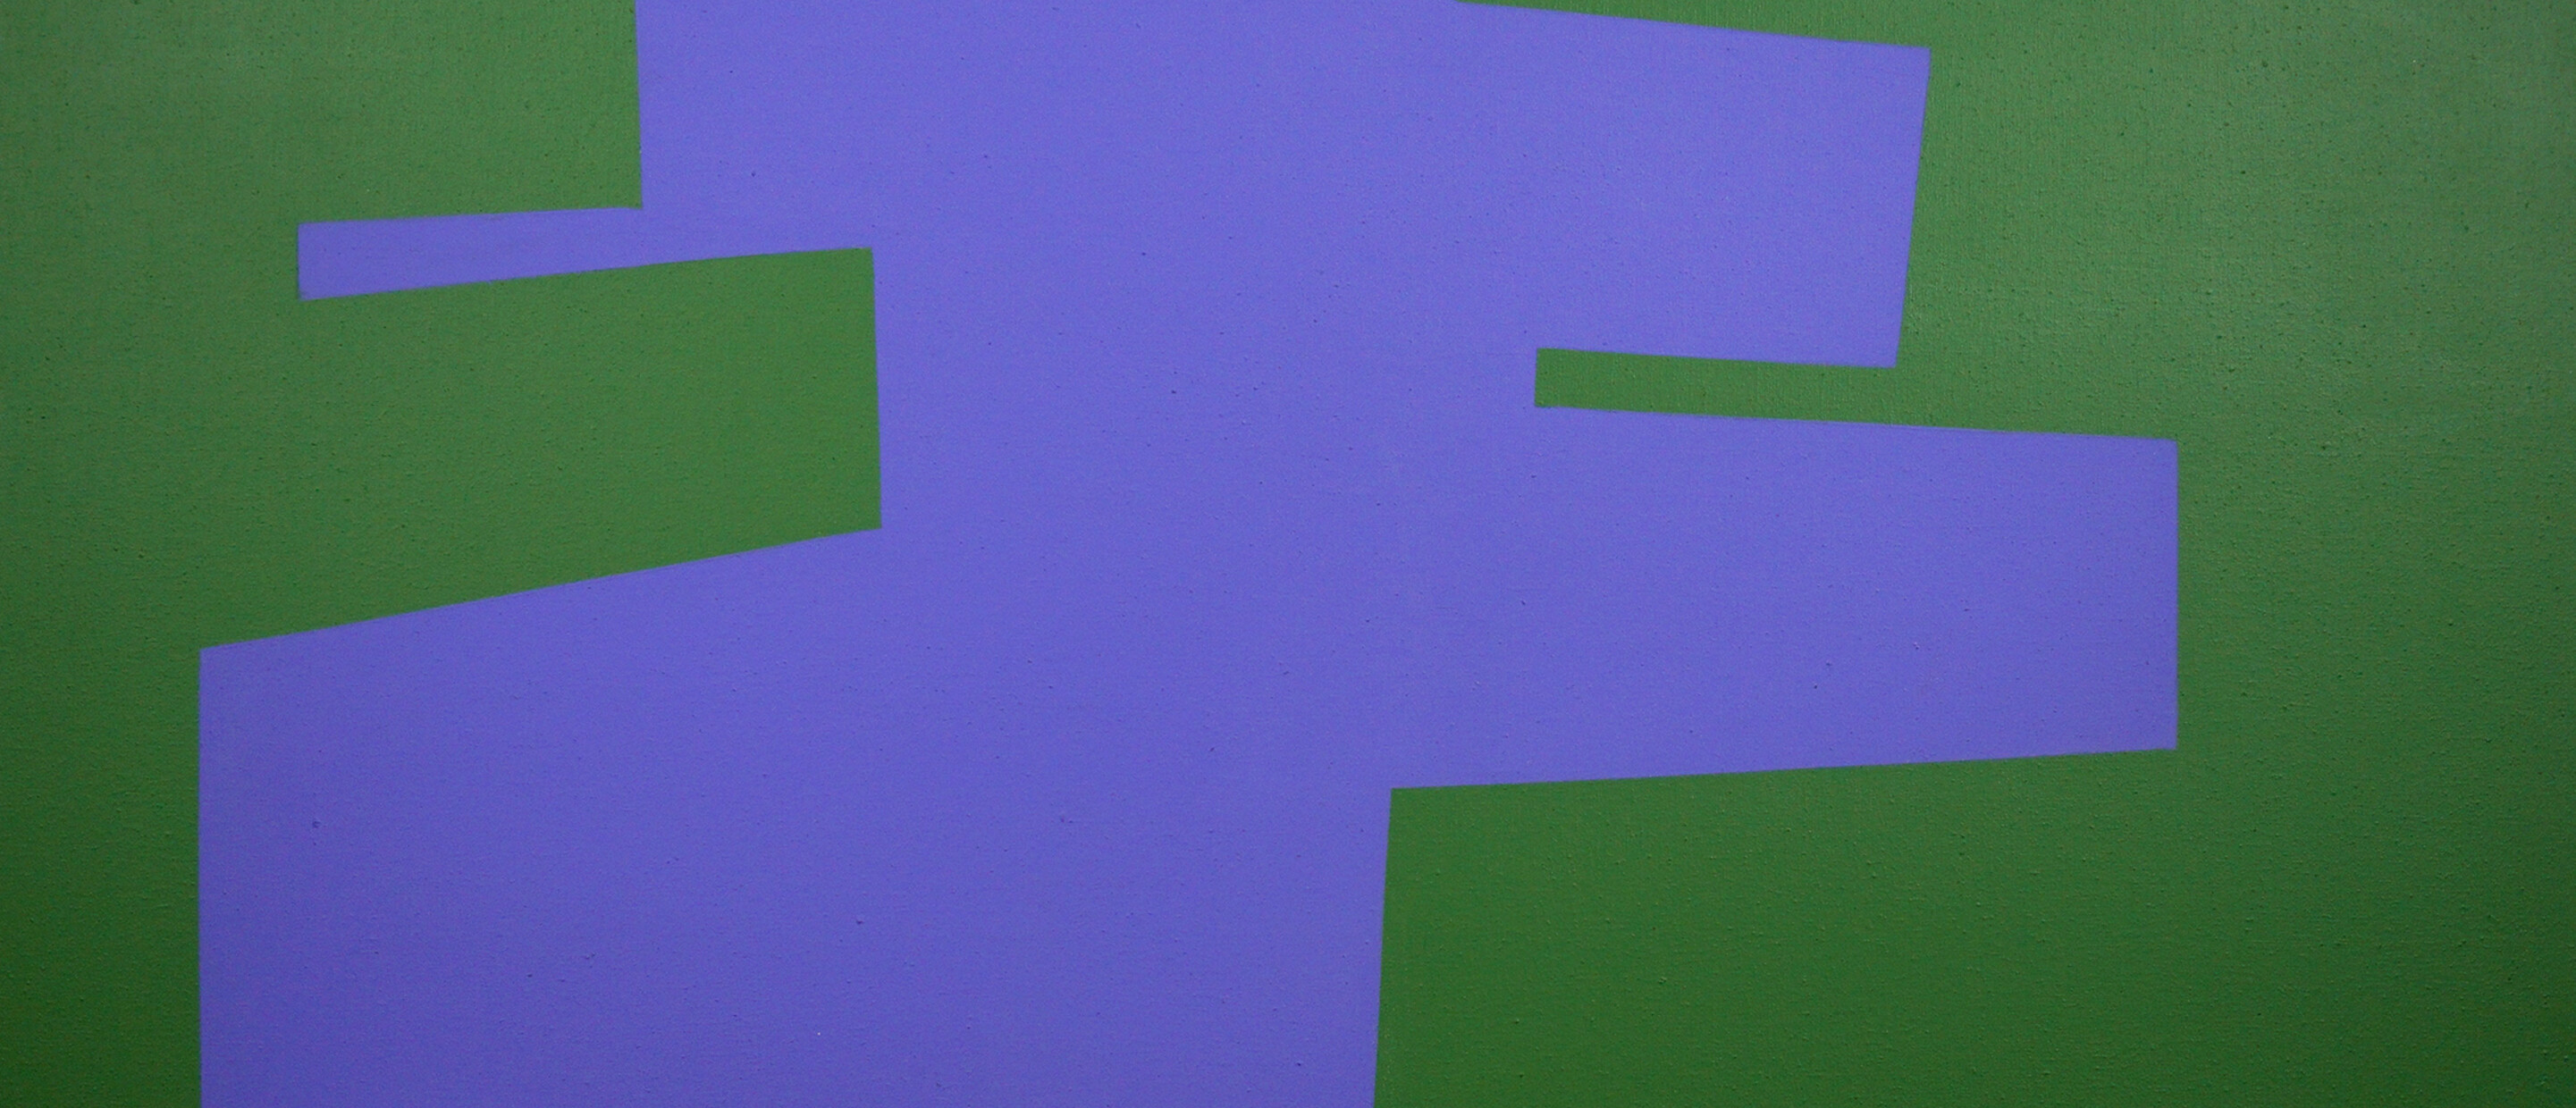 green painting with blue rectangular shapes in the center